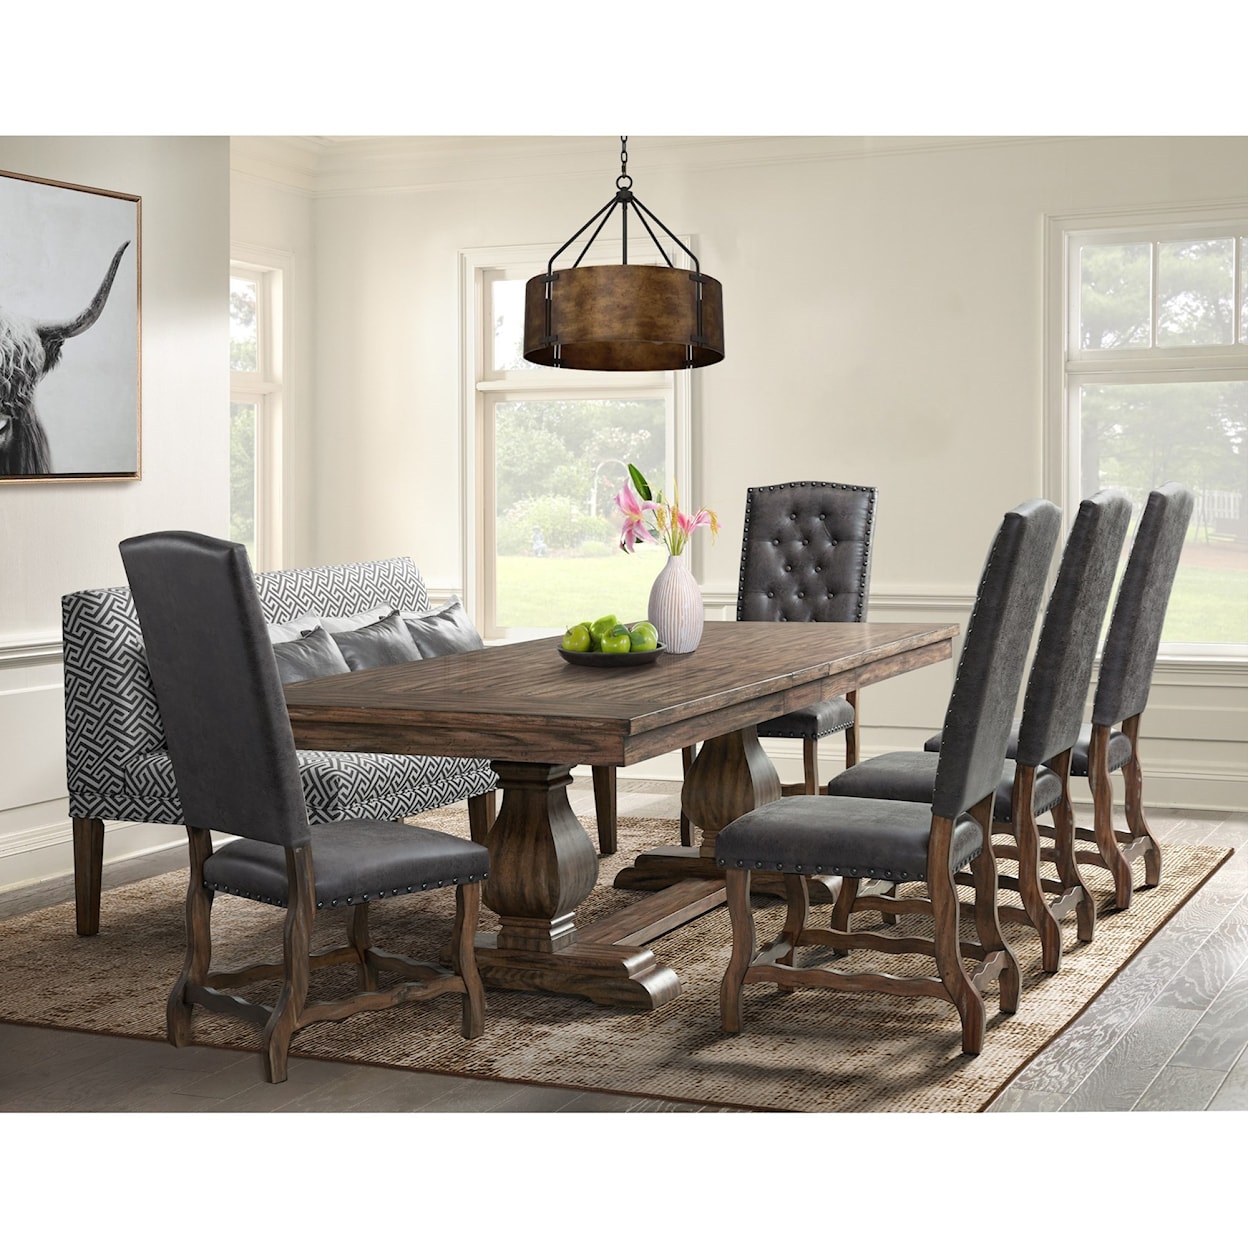 Elements International Gramercy 7-Piece Table and Chair Set with Bench